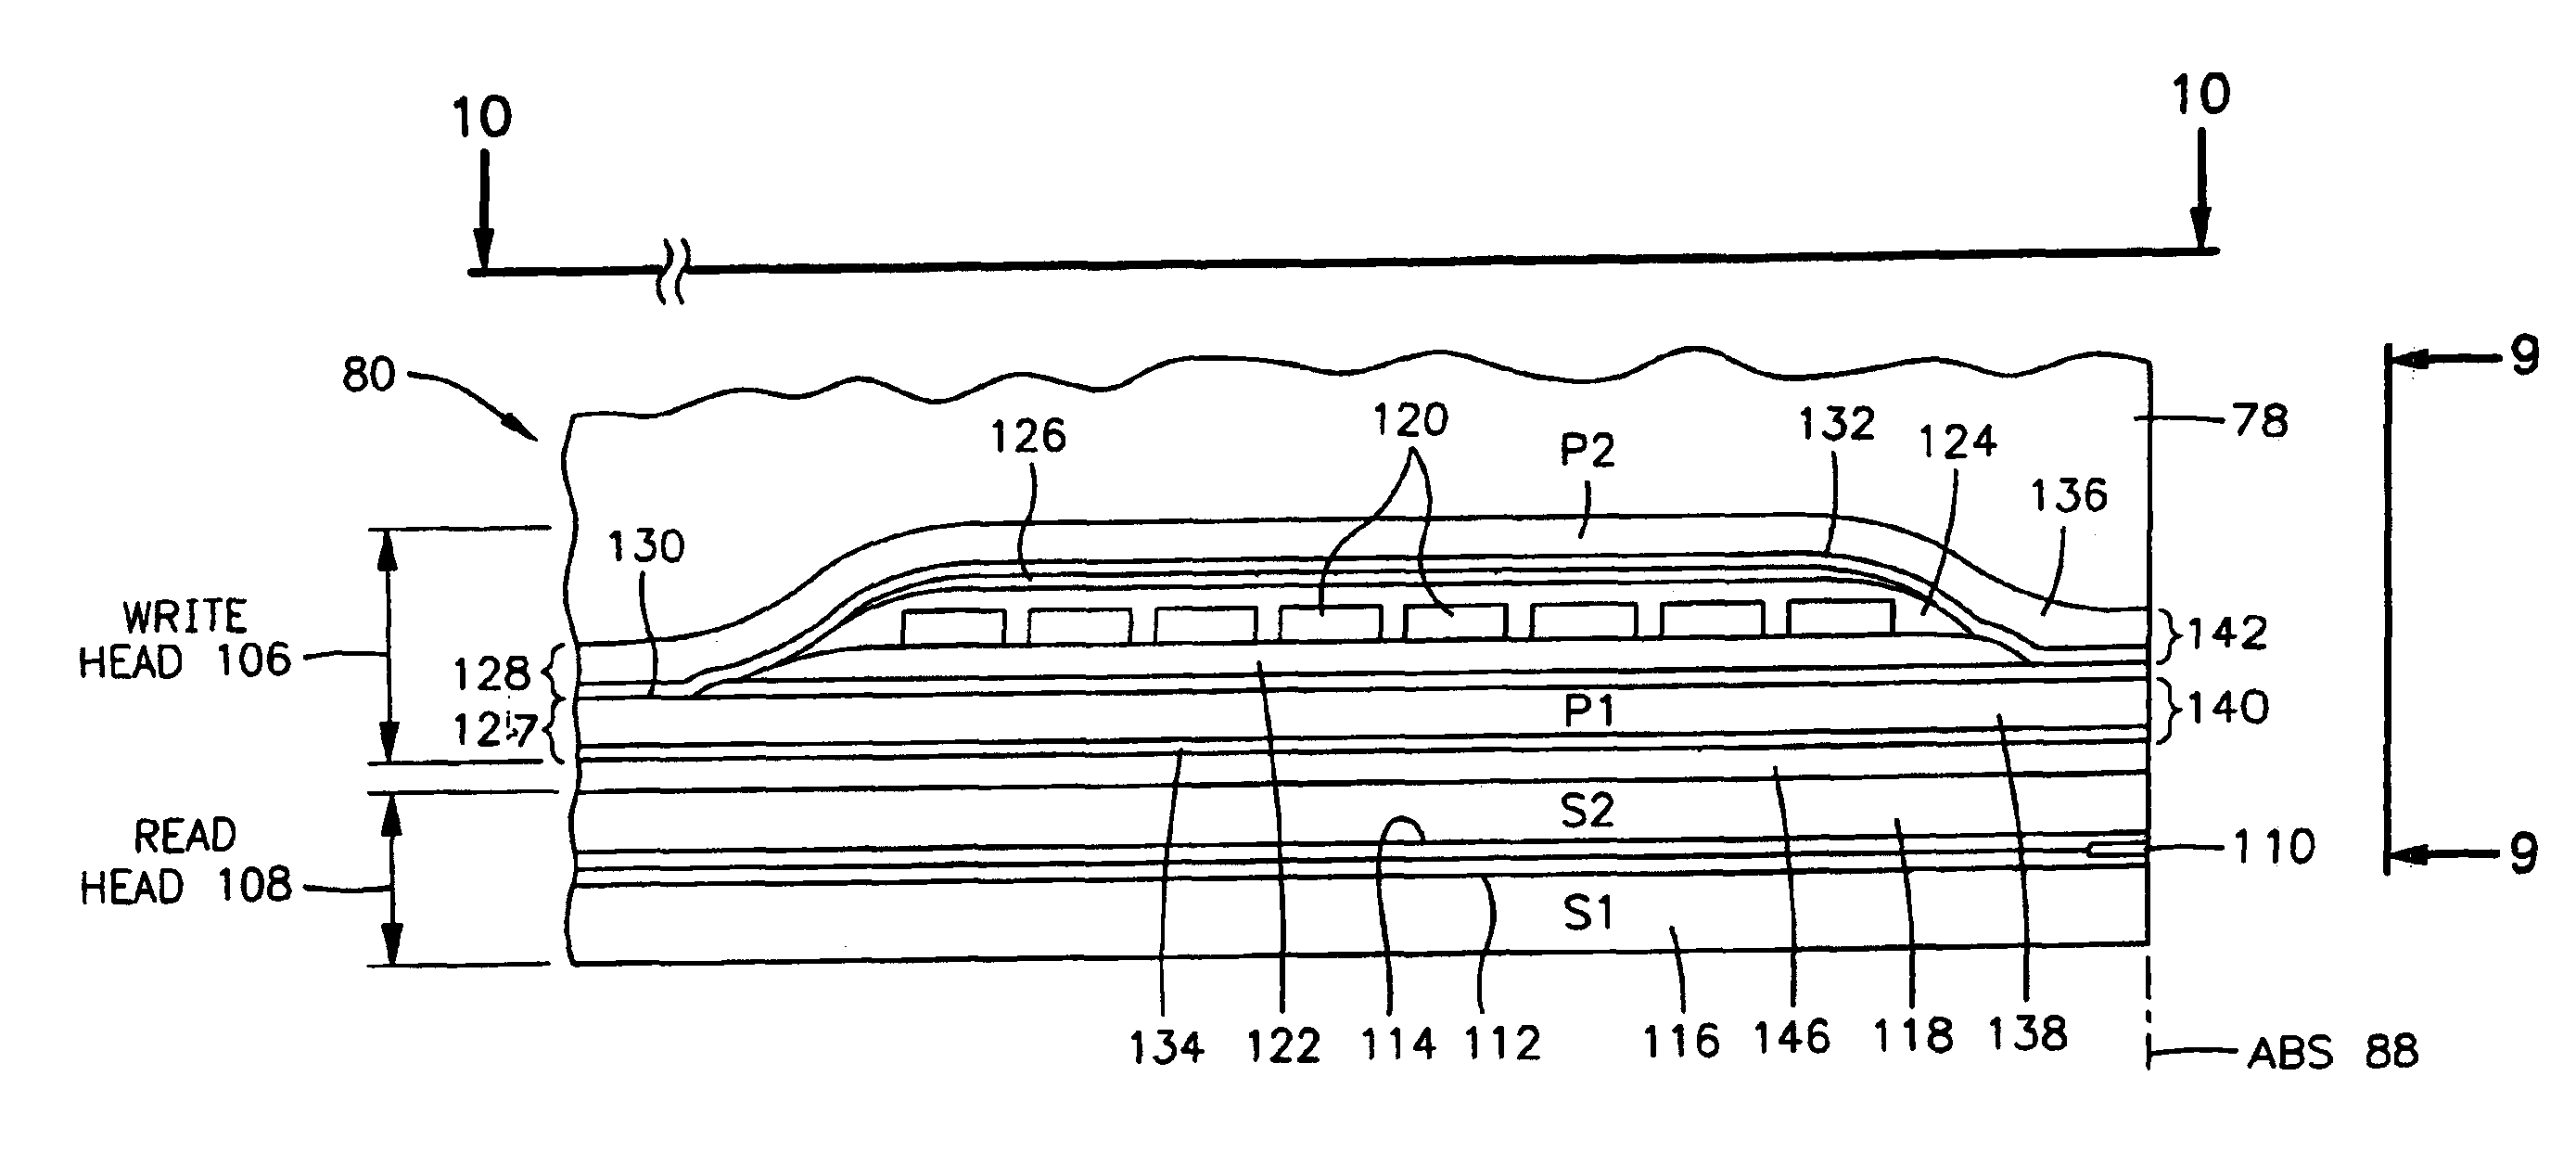 High-saturation thin-film write head for high-coercivity magnetic data storage media